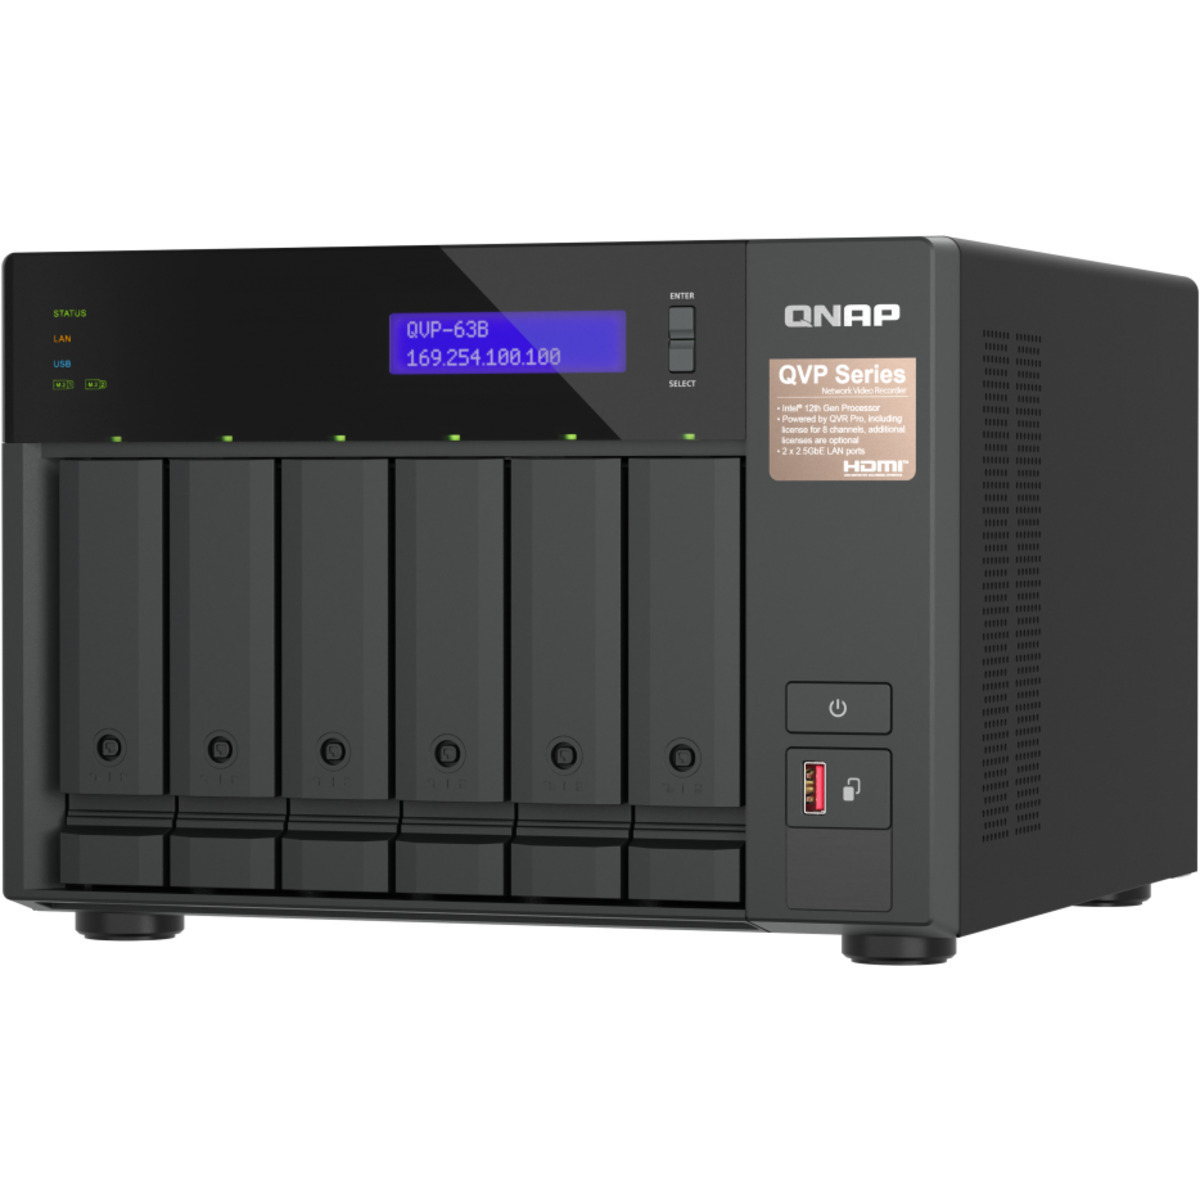 QNAP QVP-63B 72tb 6-Bay Desktop Multimedia / Power User / Business NVR - Network Video Recorder 6x12tb Seagate IronWolf ST12000VN0008 3.5 7200rpm SATA 6Gb/s HDD NAS Class Drives Installed - Burn-In Tested QVP-63B